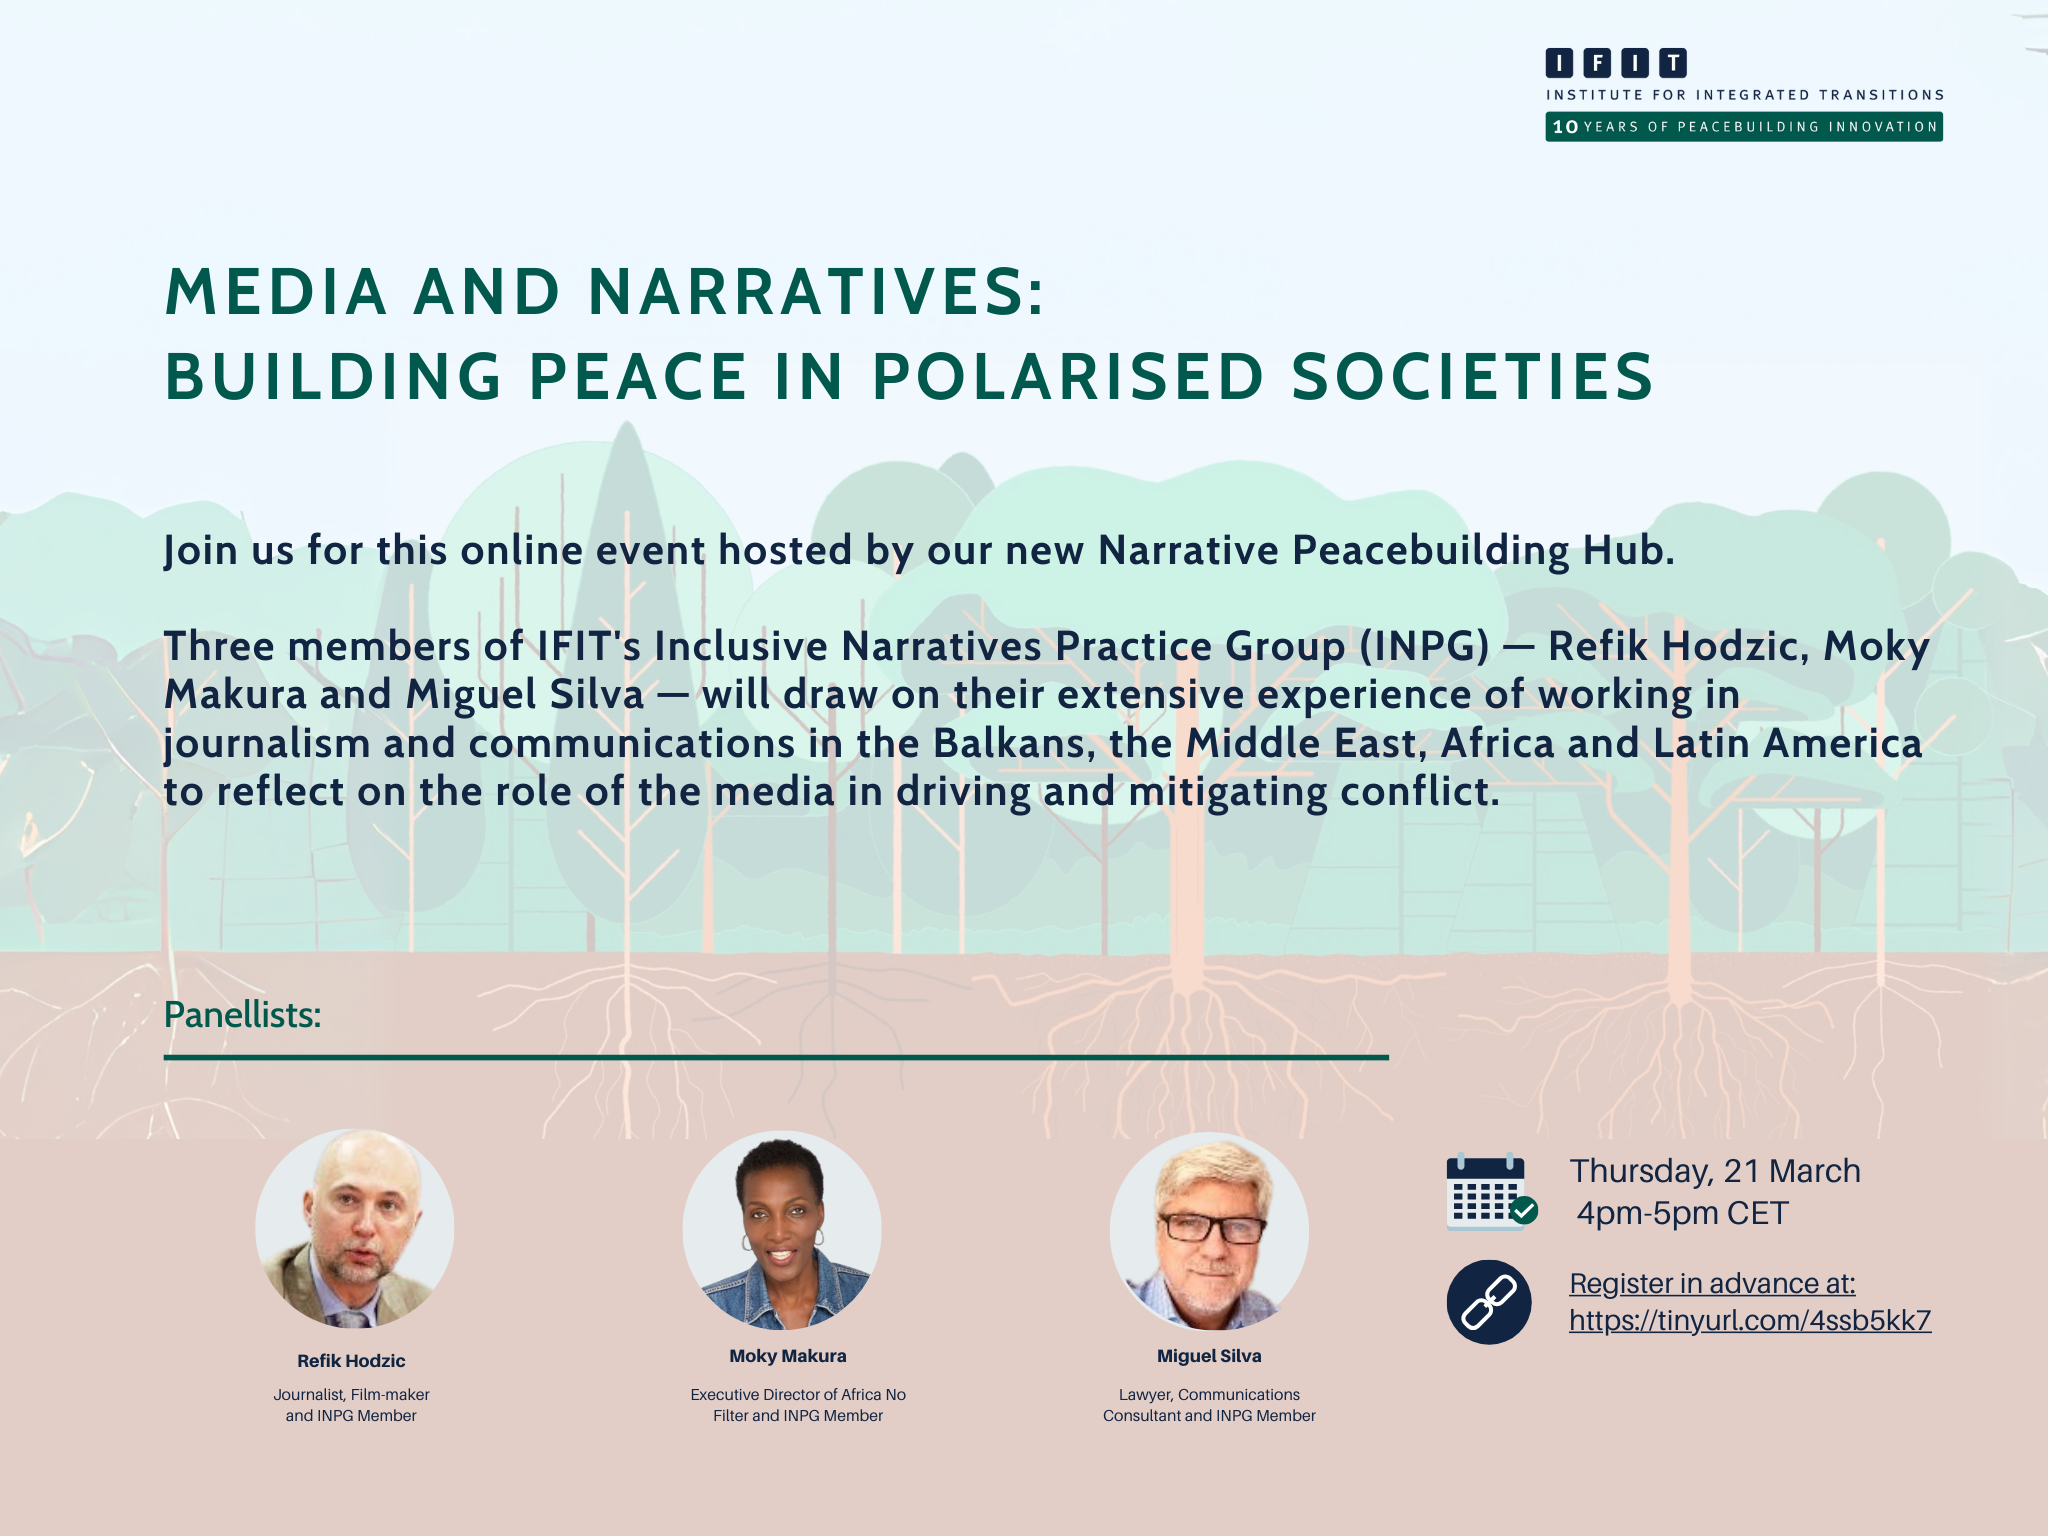 Media and Narratives: Building Peace in Polarised Societies